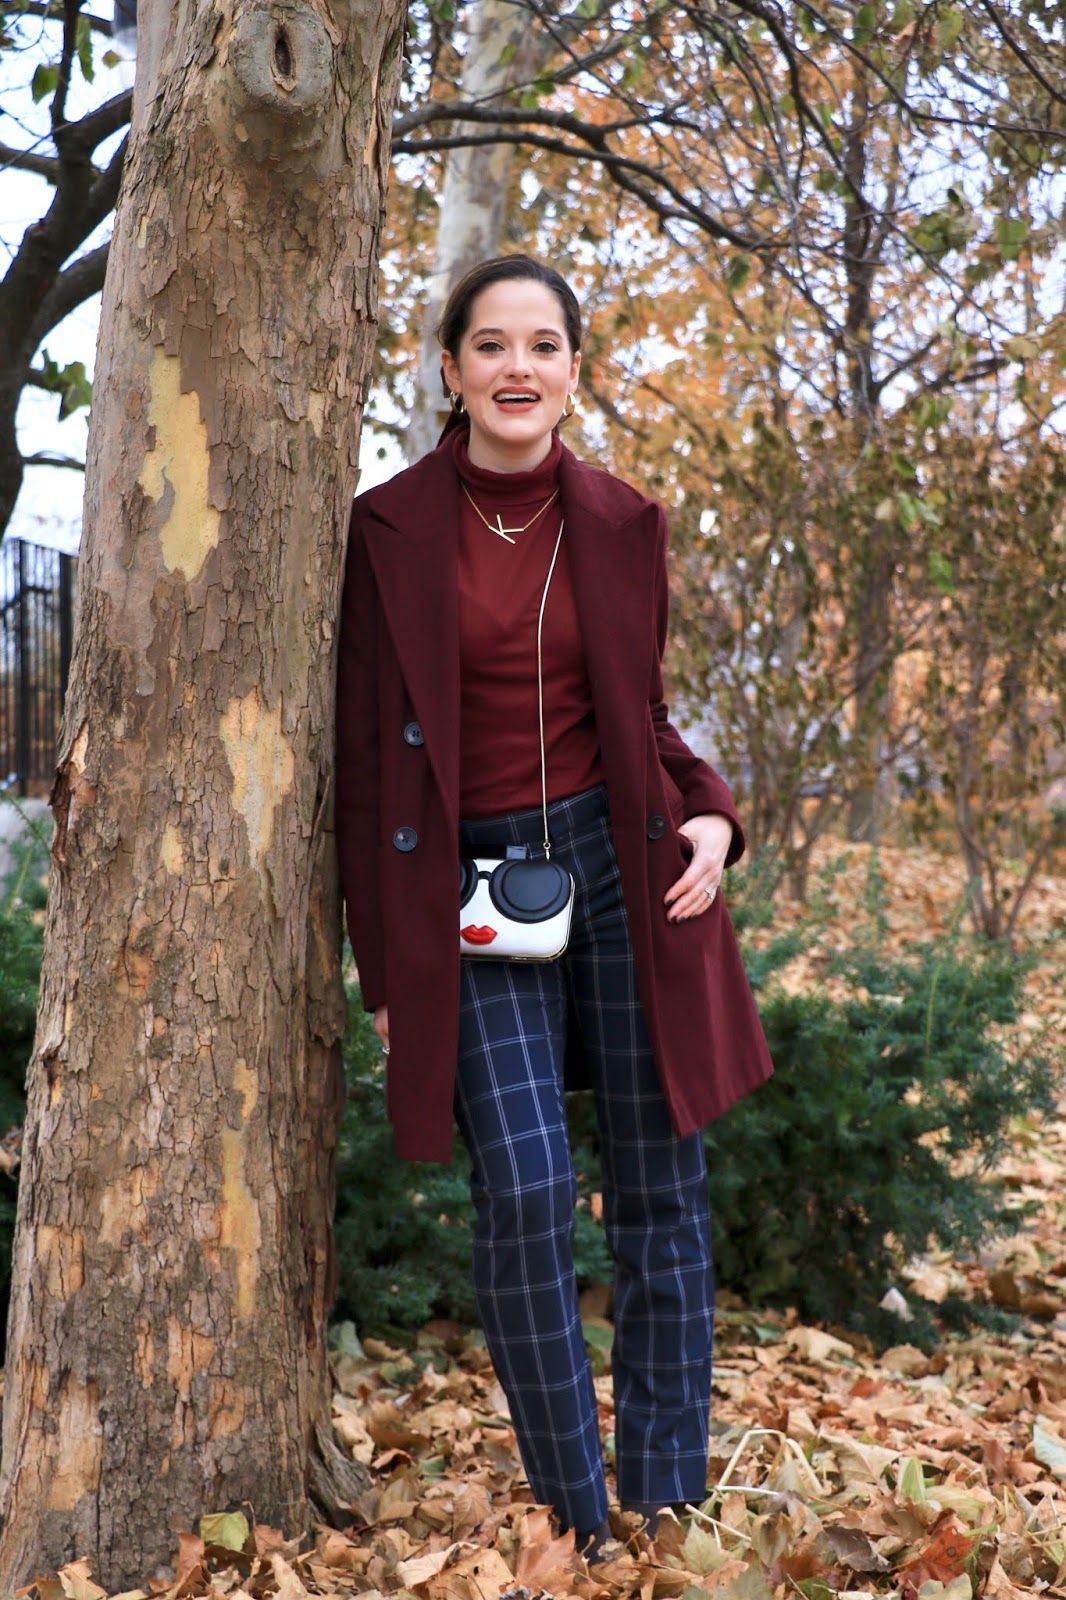 Burgundy Coat Outfit Ideas for
  Women